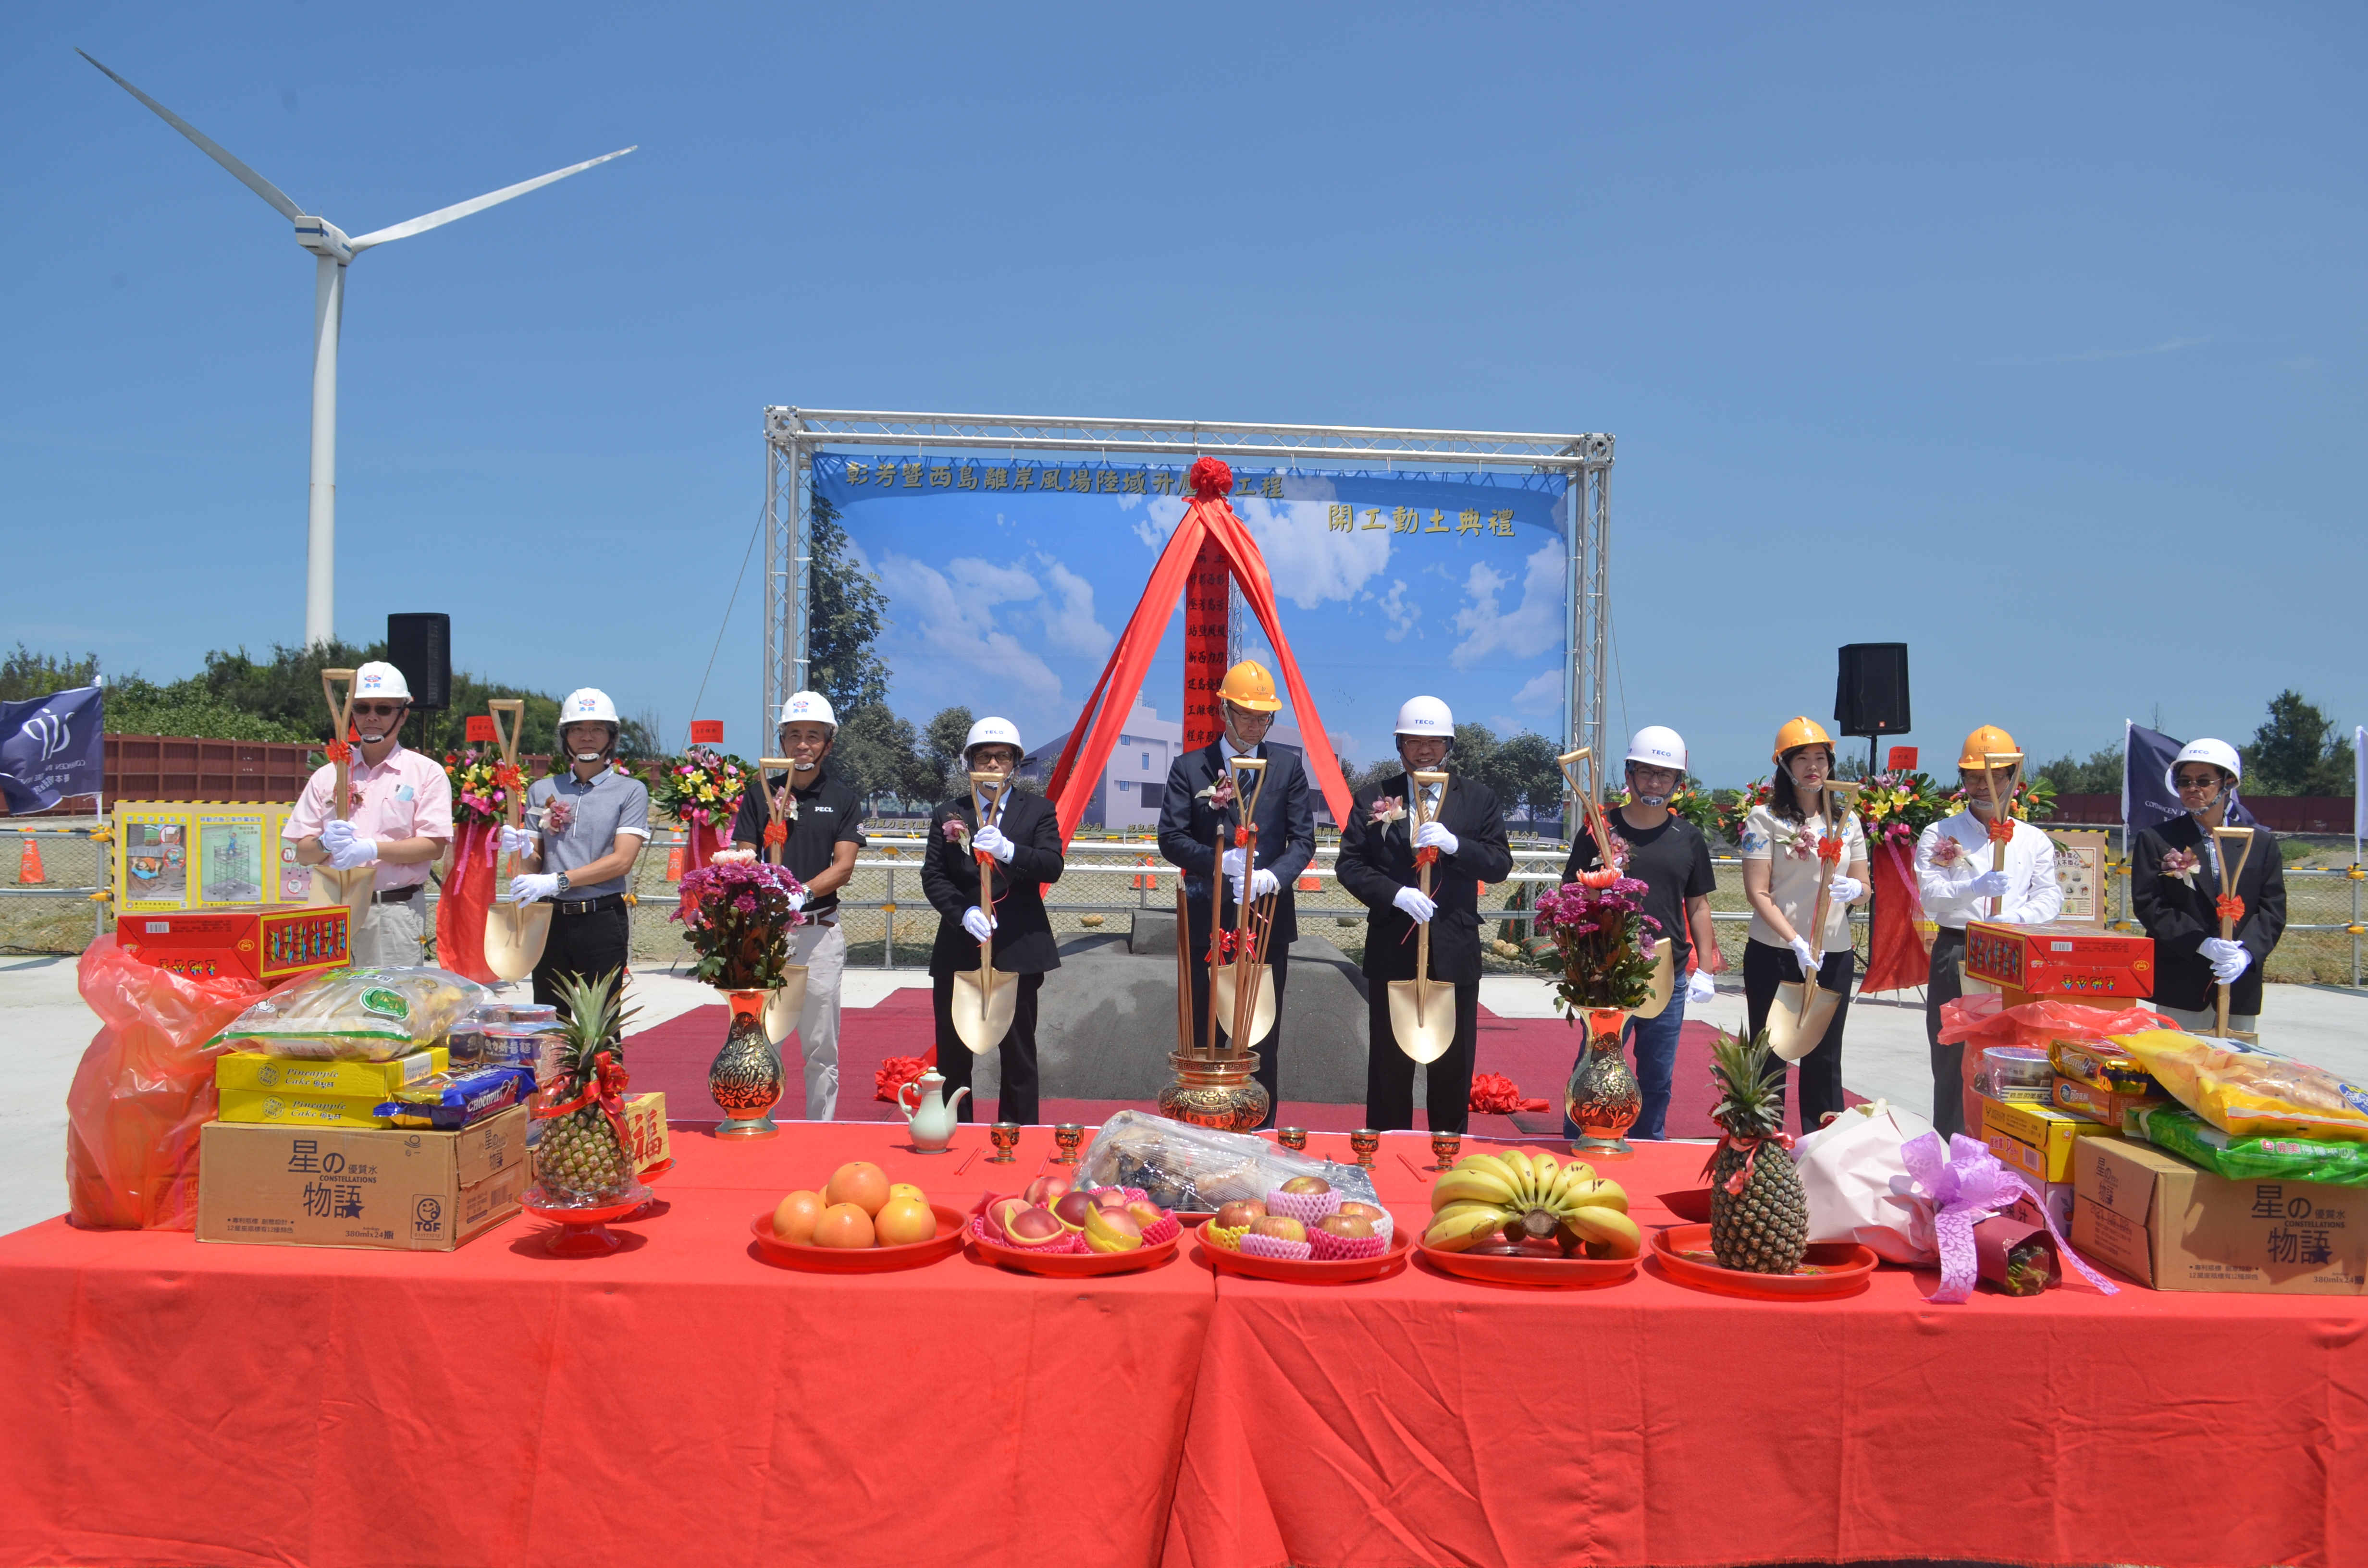 The ground breaking ceremony for the Changfang & Xidao Offshore Wind Farms construction works onshore